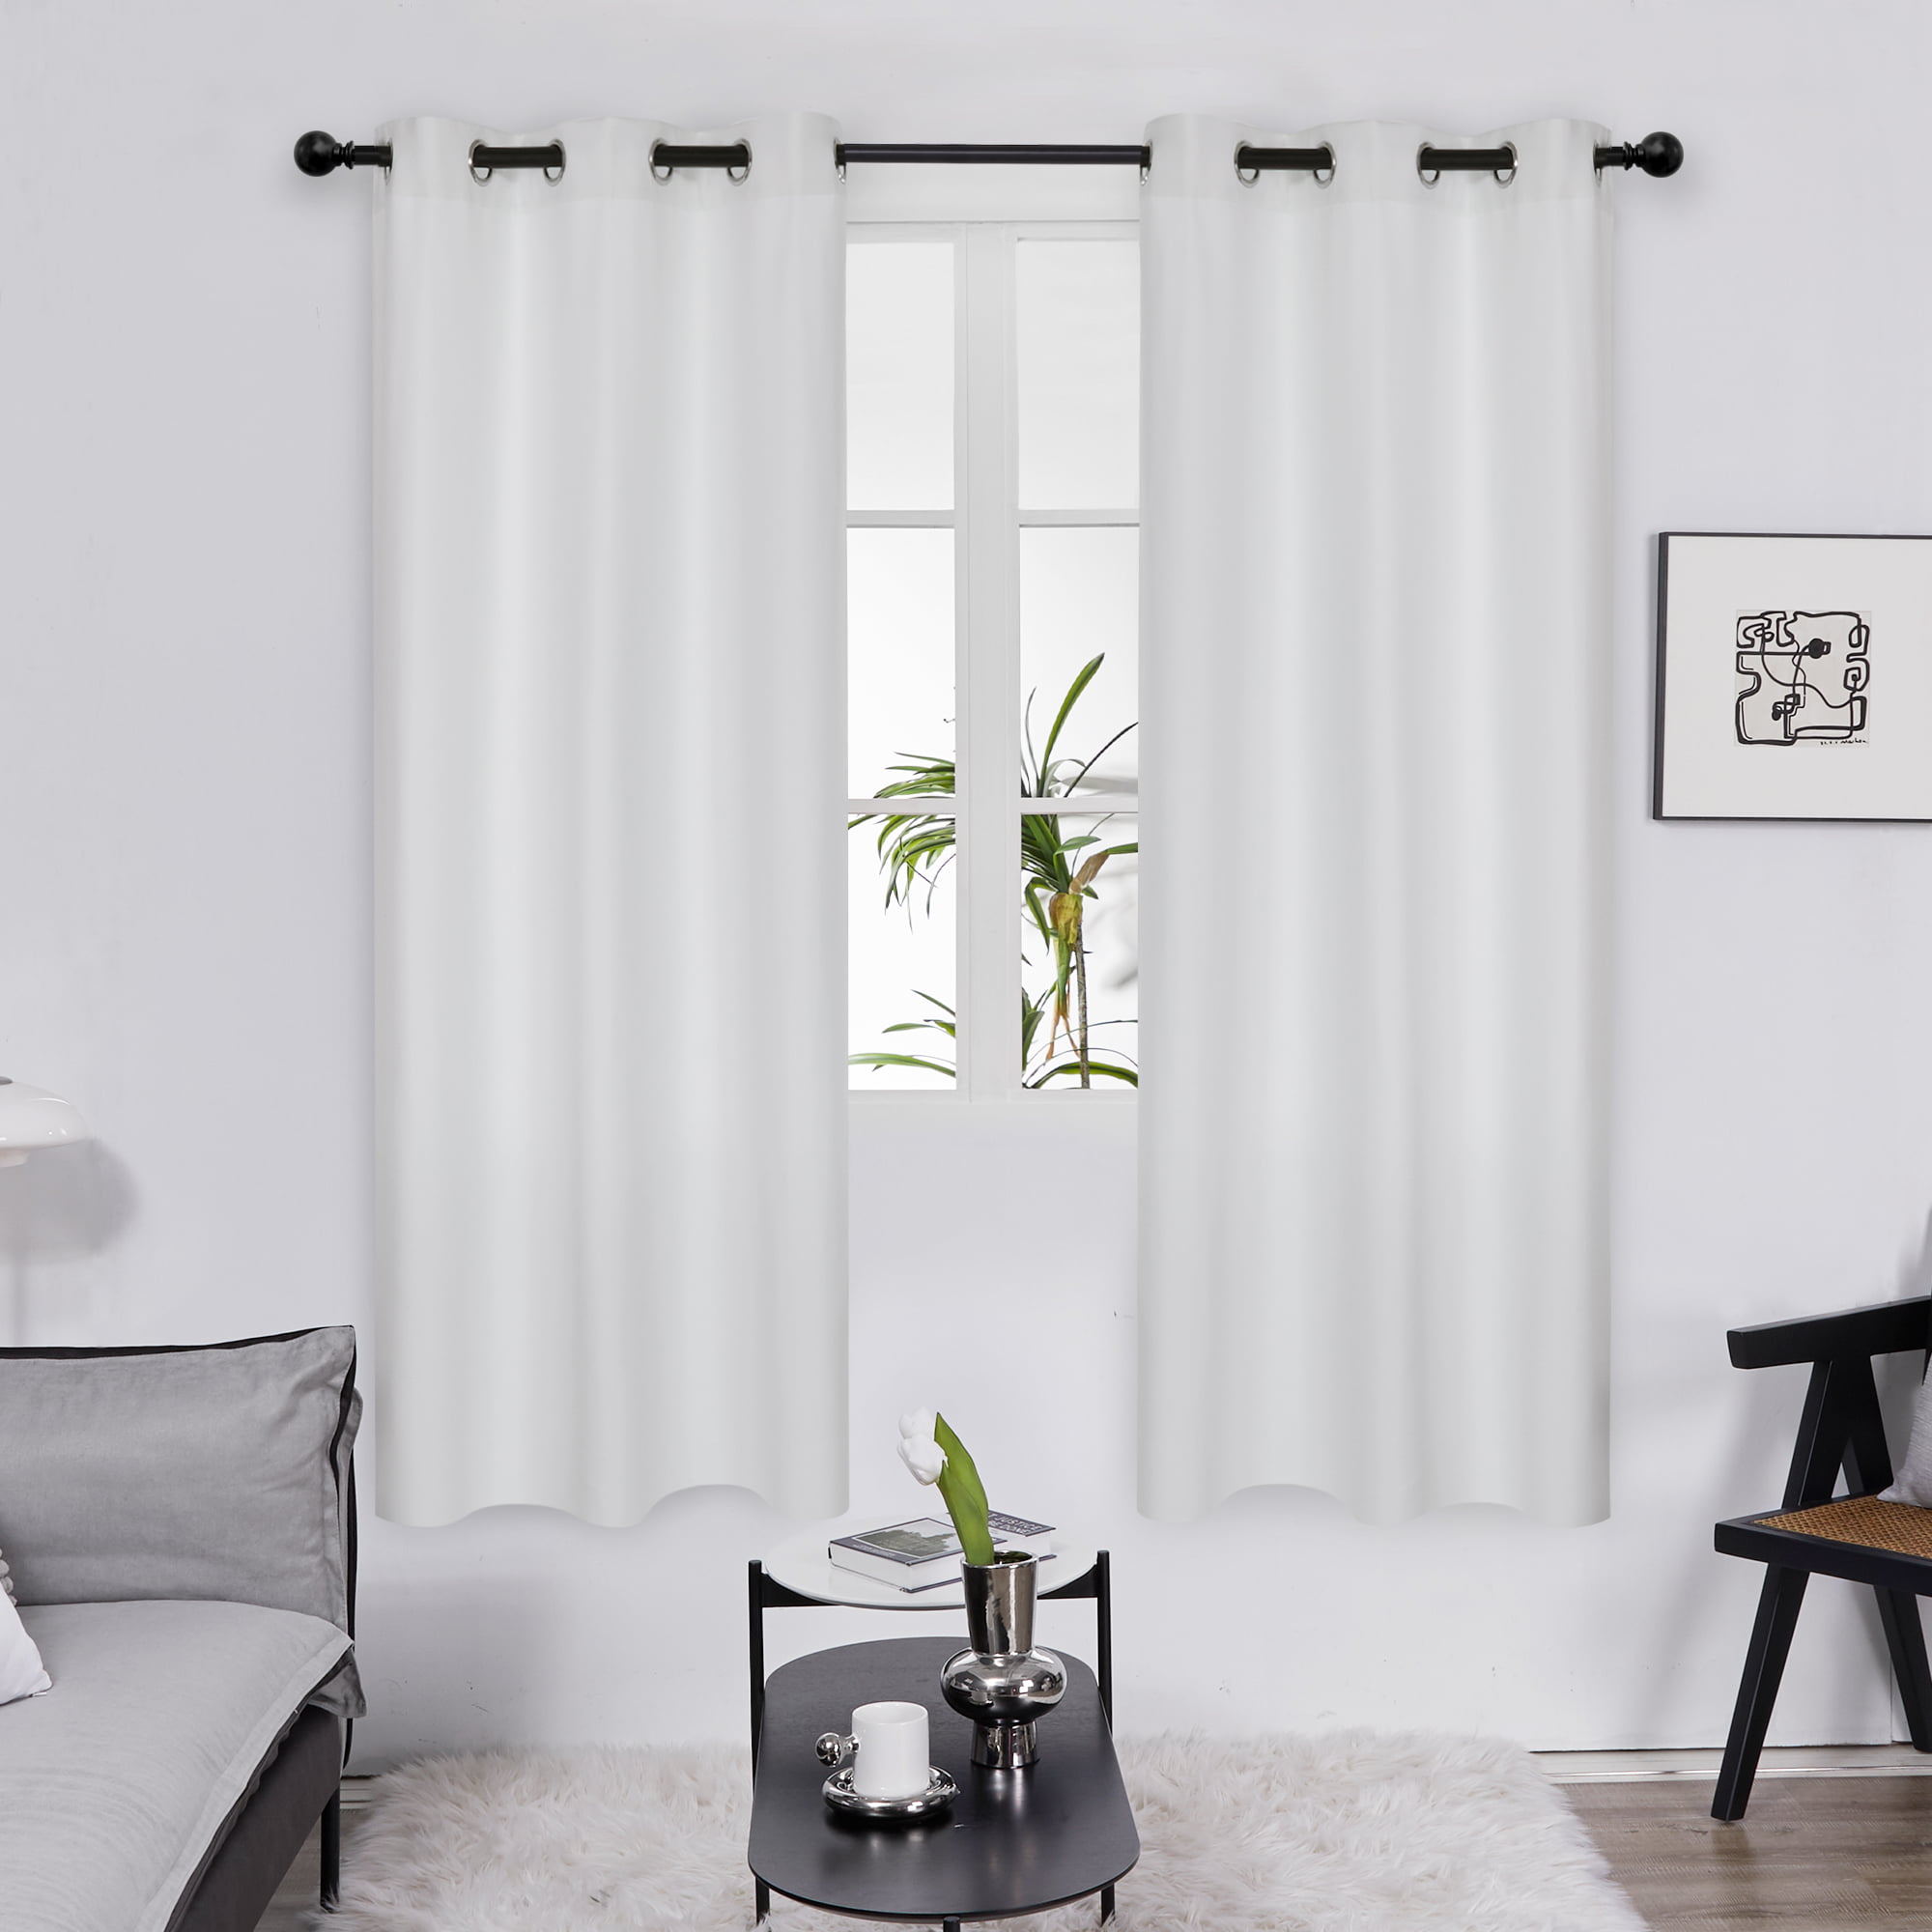 Deconovo Thermal Insulated Blackout Curtains Room Darkening Grommet Curtain  Panels for Living Room 38 x 72 inch, Off White, Set of 2 - Walmart.com